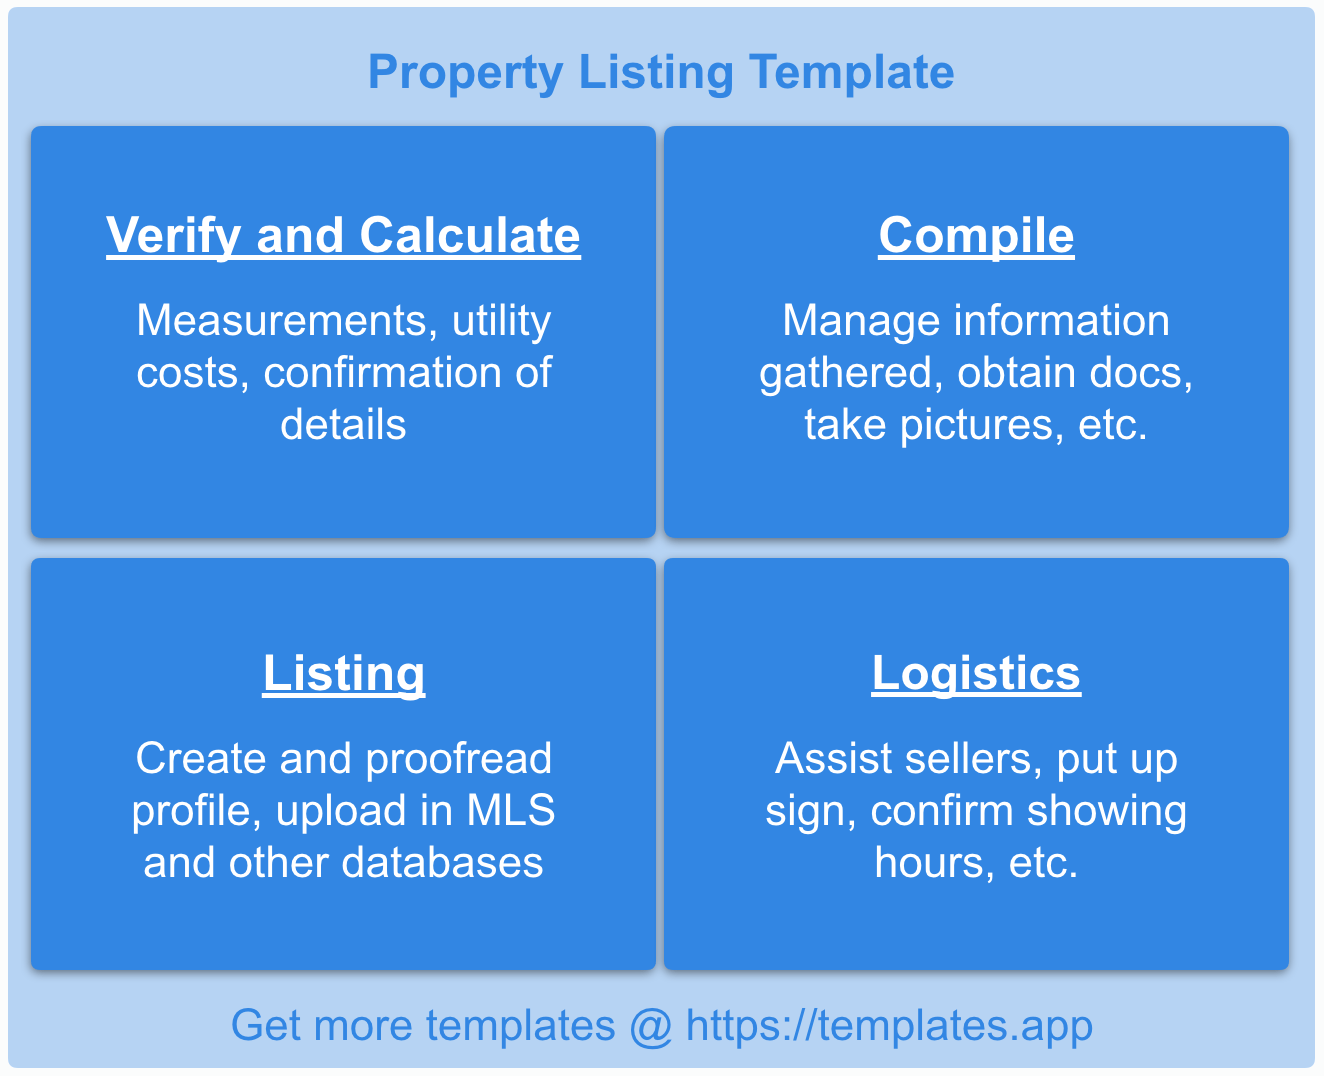 Real Estate Transaction Checklist: Property Listing Template by templates.app